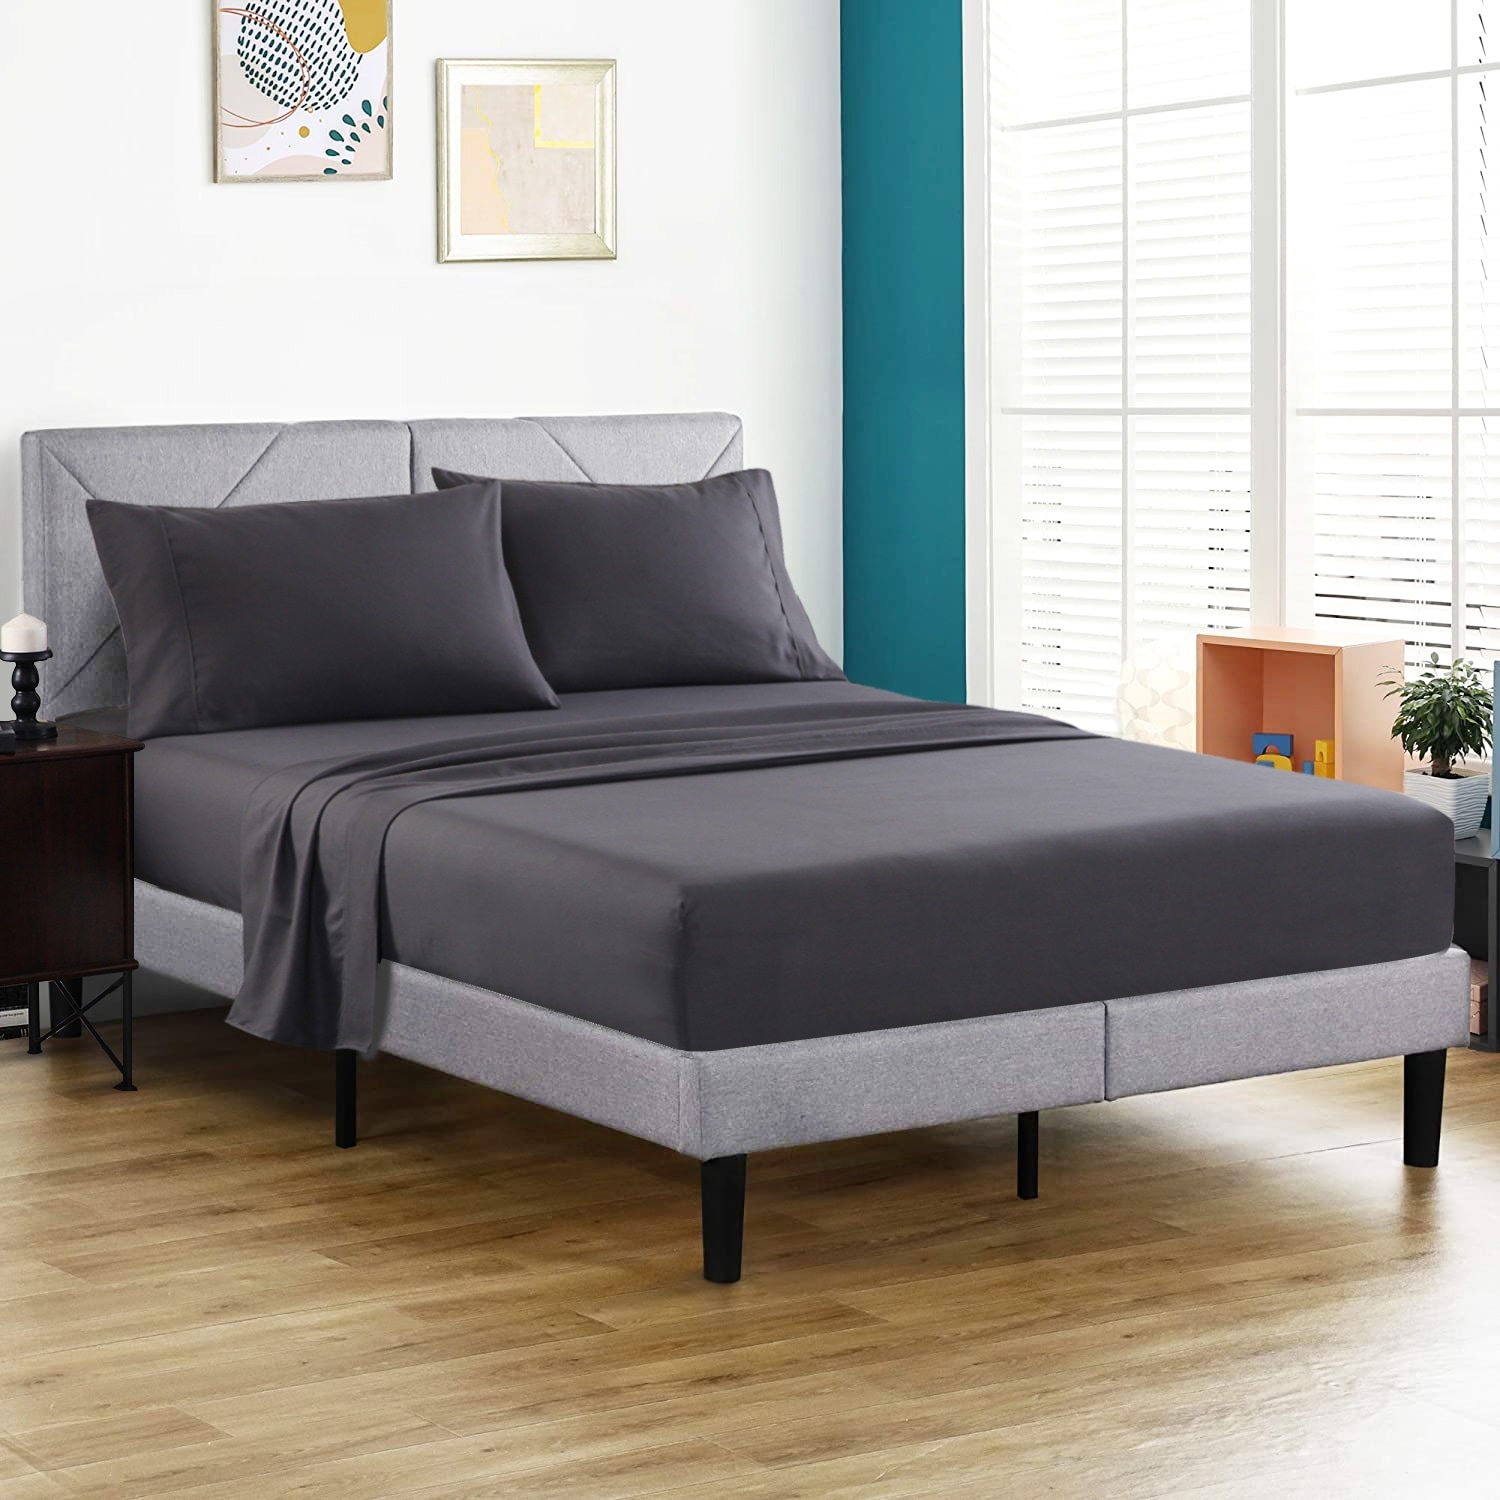 https://ak1.ostkcdn.com/images/products/is/images/direct/02061a531c2154aa2d03c2ae8c8911bbbc85c5f8/4-Piece-Brushed-Microfiber-Bed-sheet-Set-Wrinkle%2C-Fade%2C-Stain-Resistant.jpg